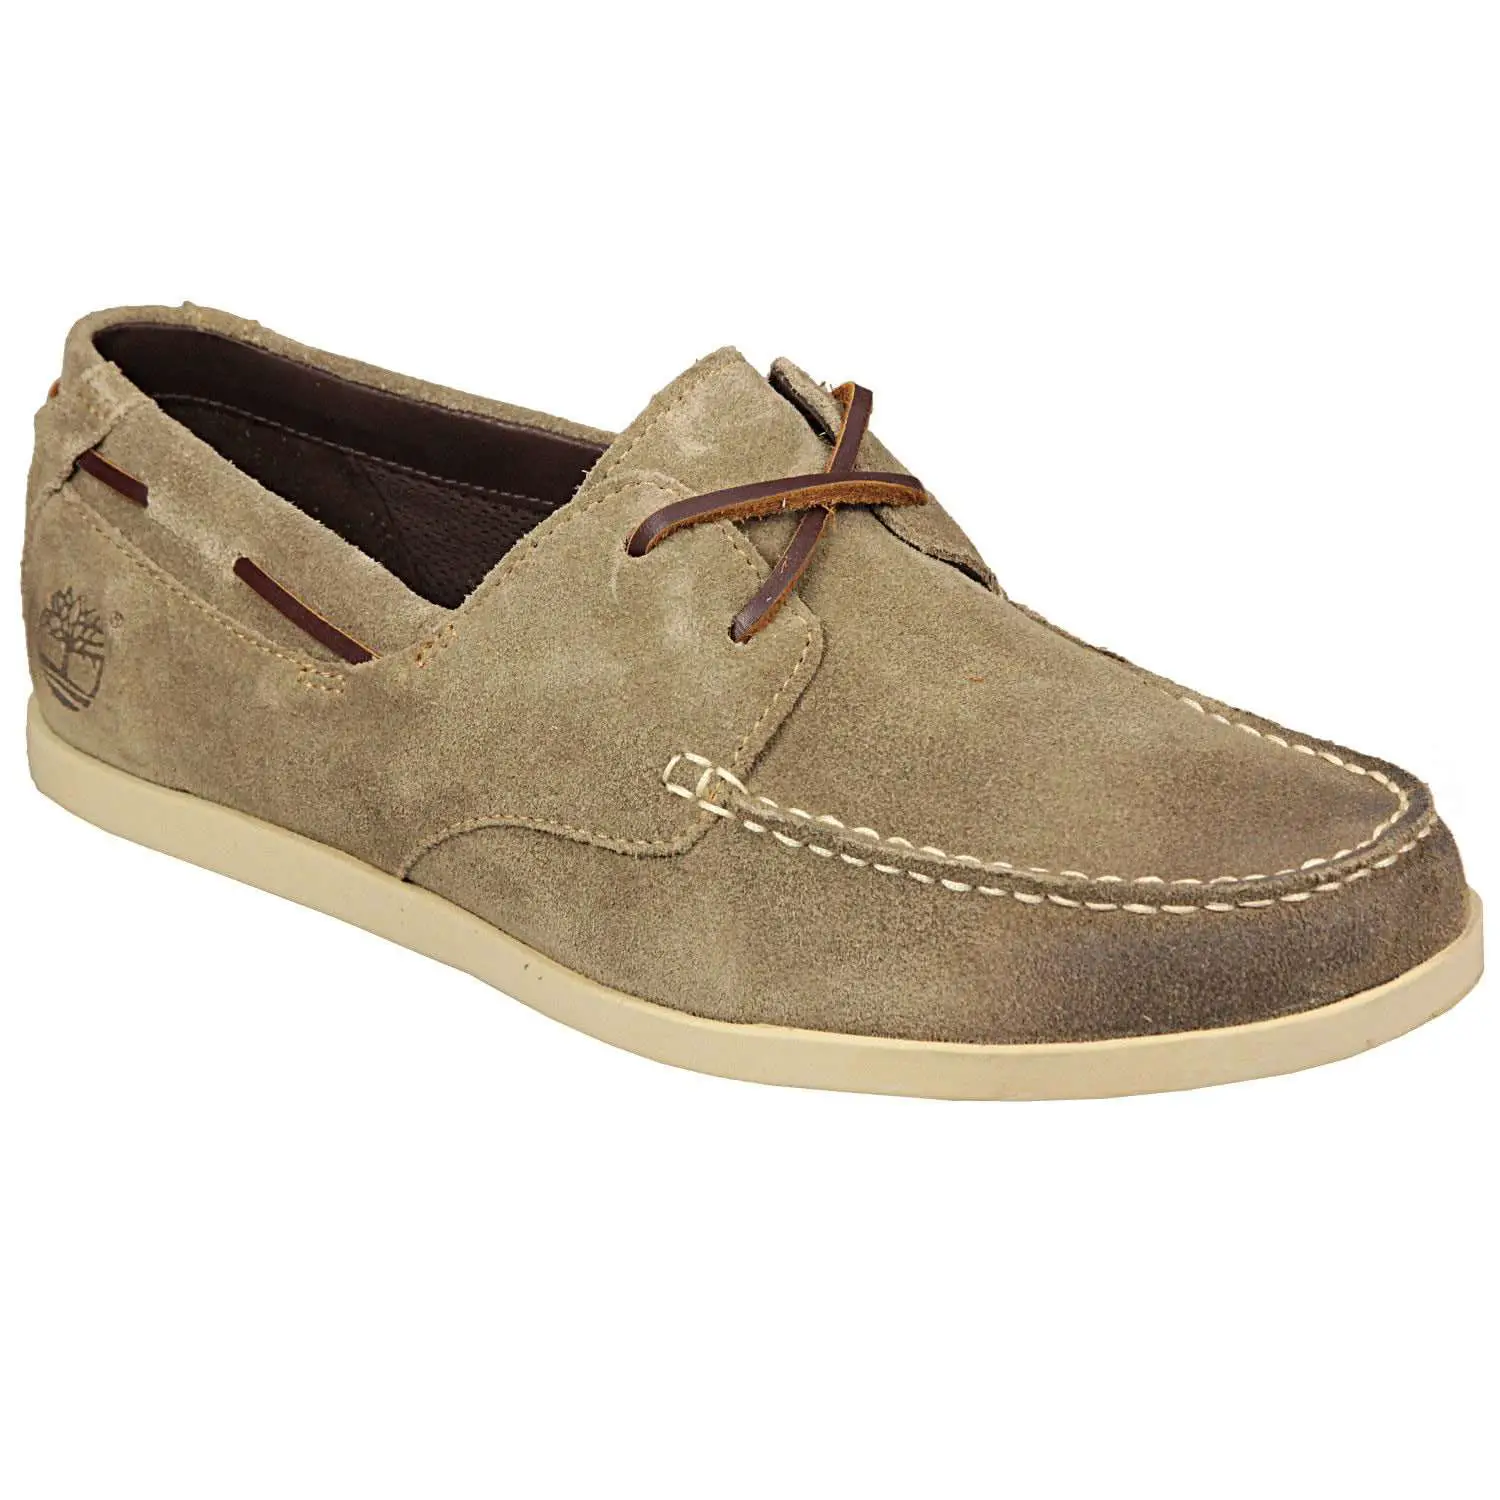 Buy Timberland Mens Suede Boat Shoes in